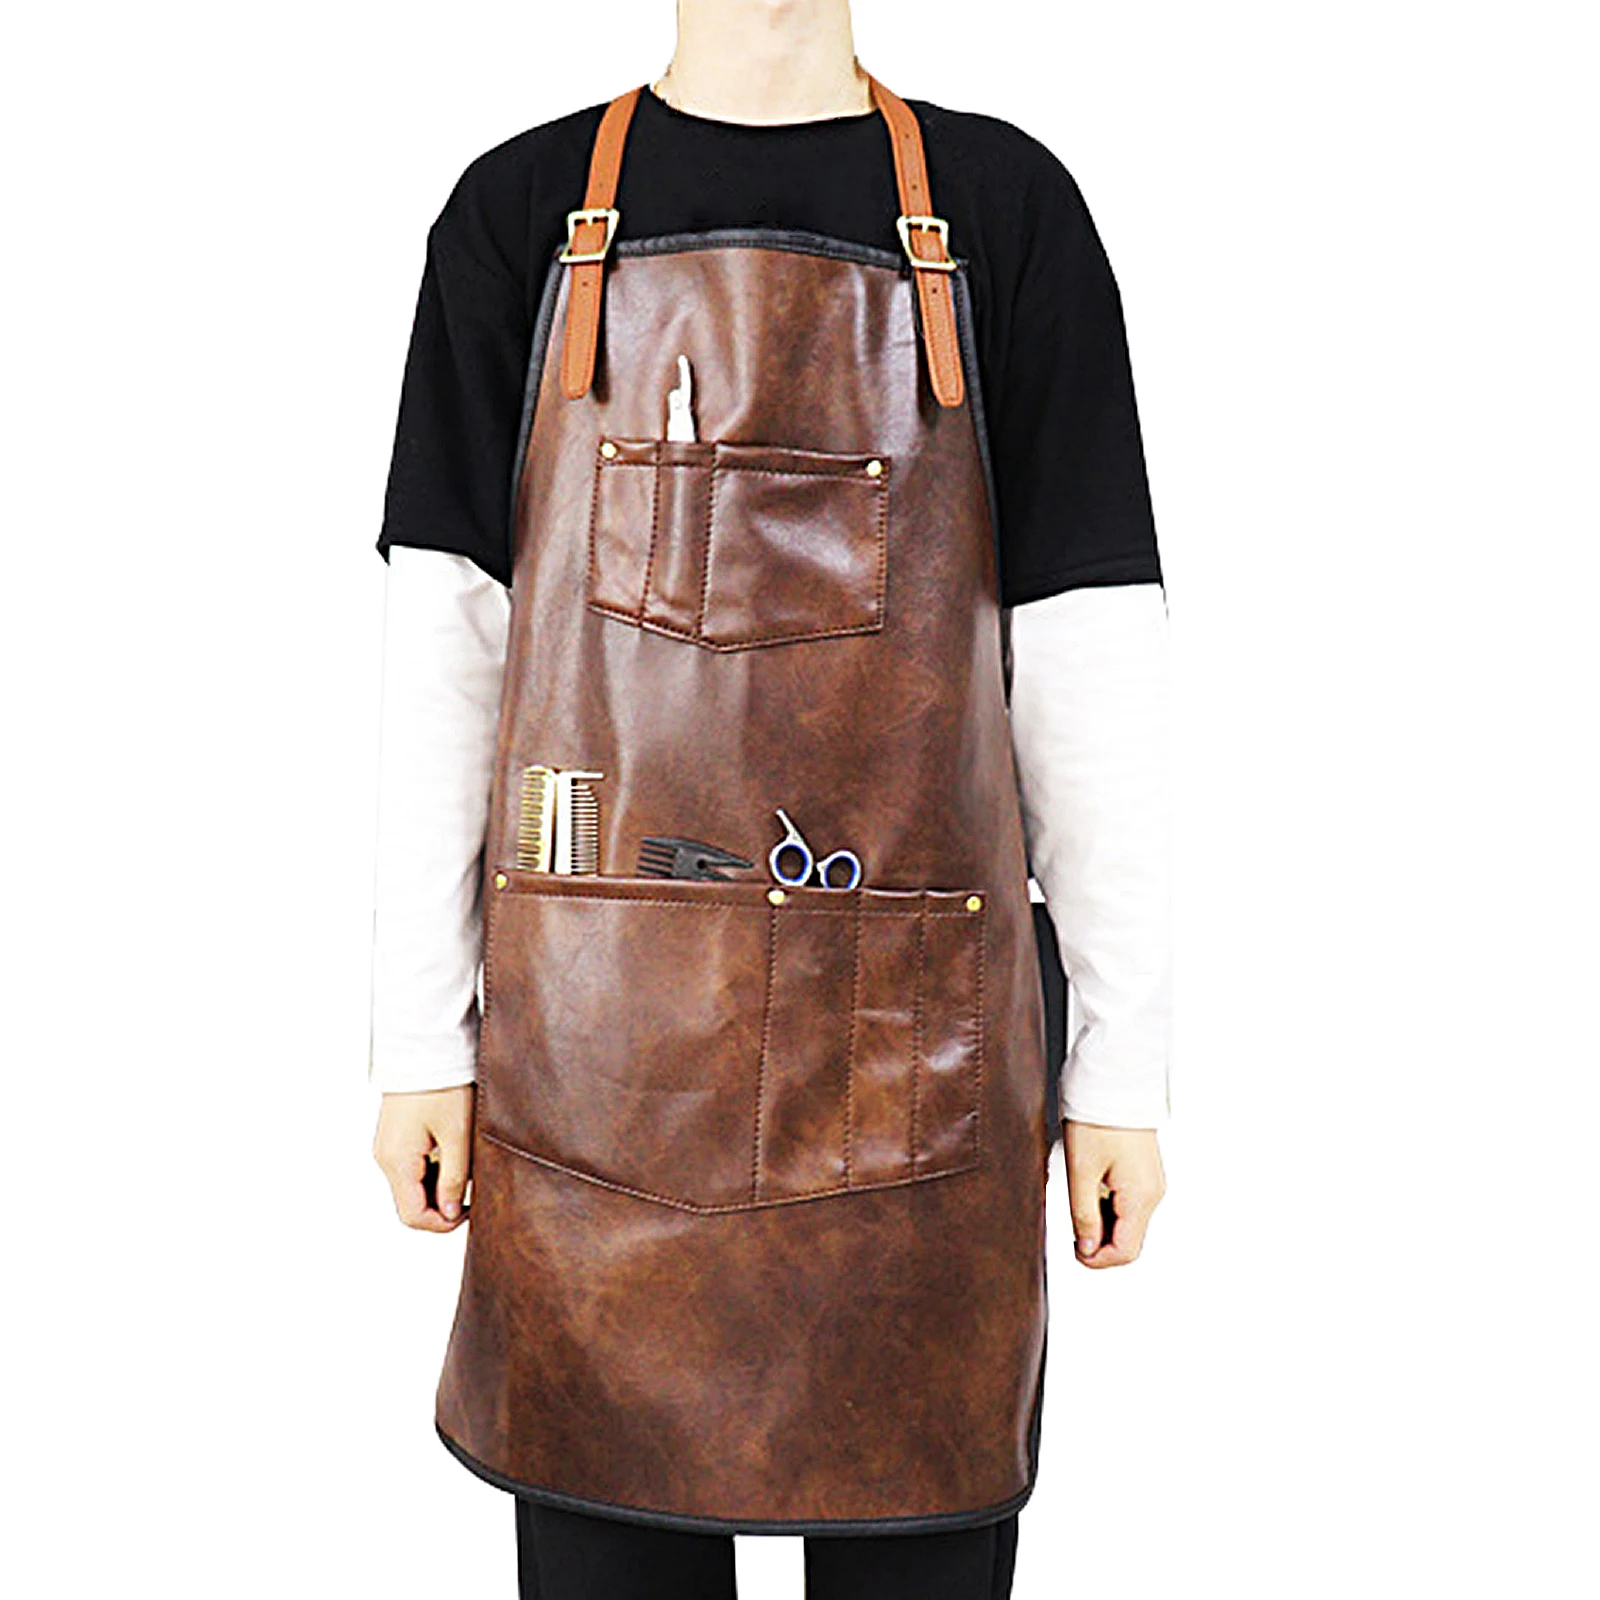 CrossBack PU Leather Hairdressing Barber Apron Work Apron Professional Grade Chef Apron Multi-use Heavy Duty Premium Quality